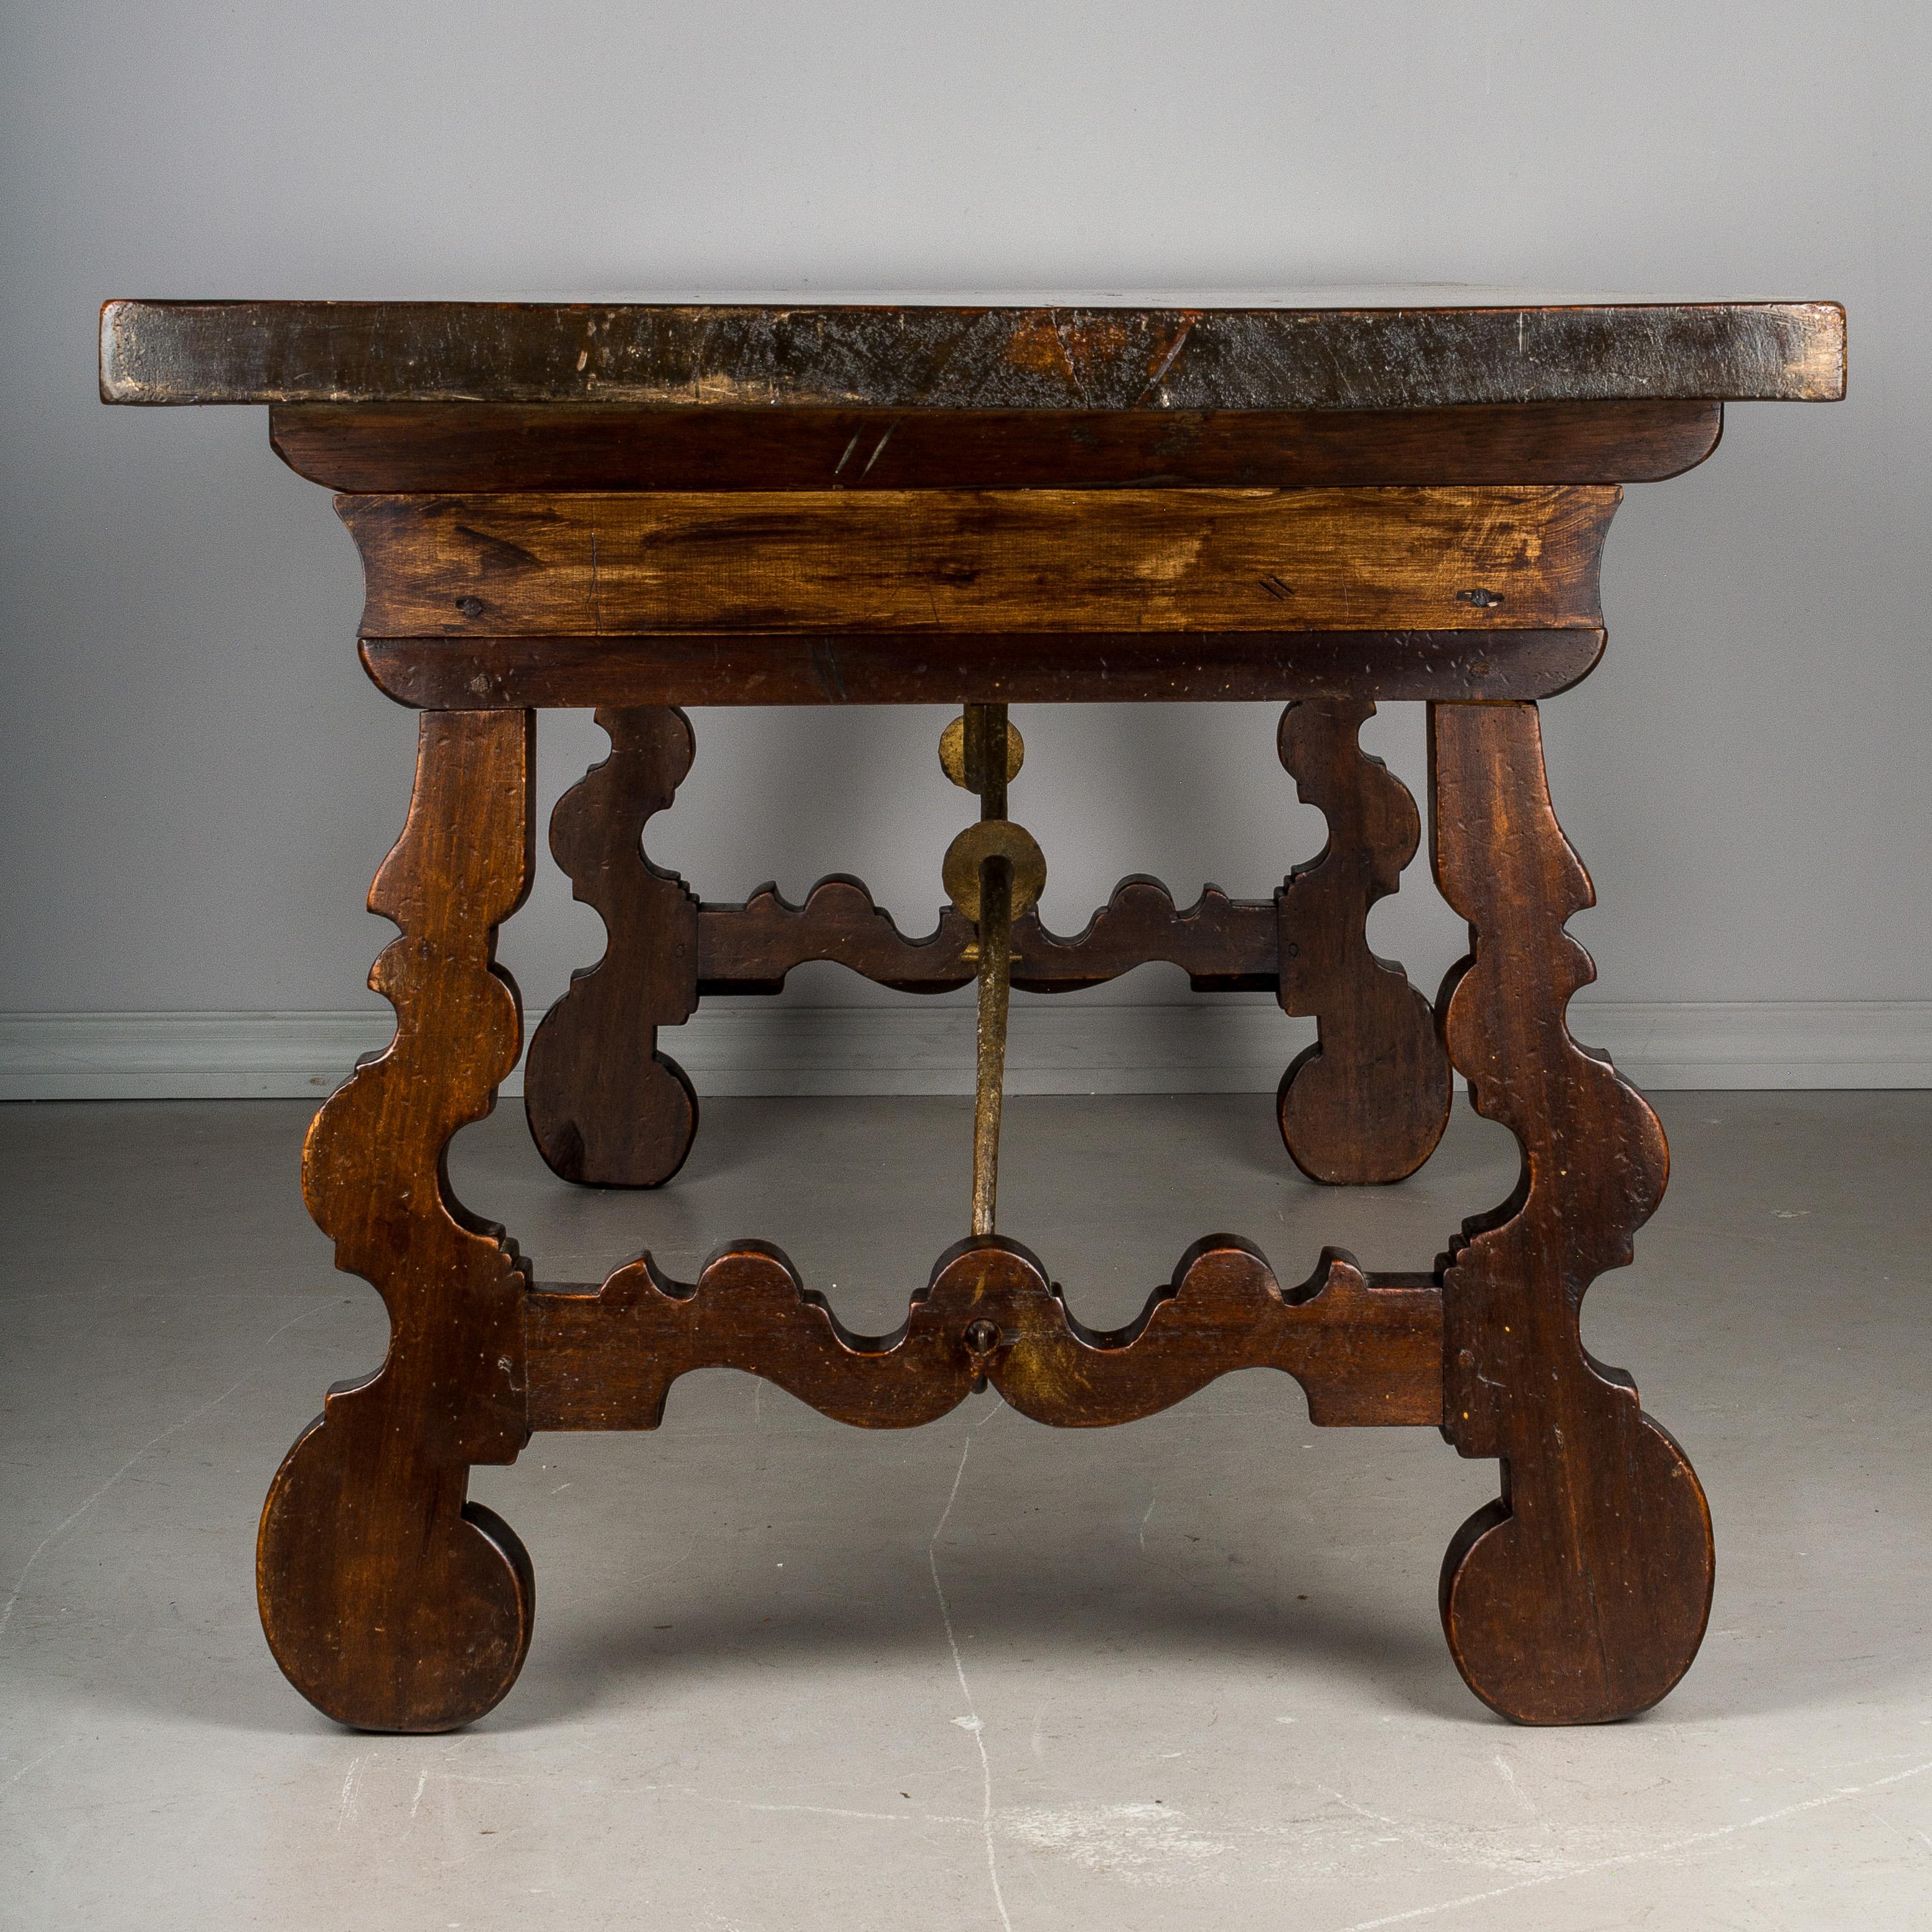 Spanish Baroque Style Refectory Table (Geschmiedet)